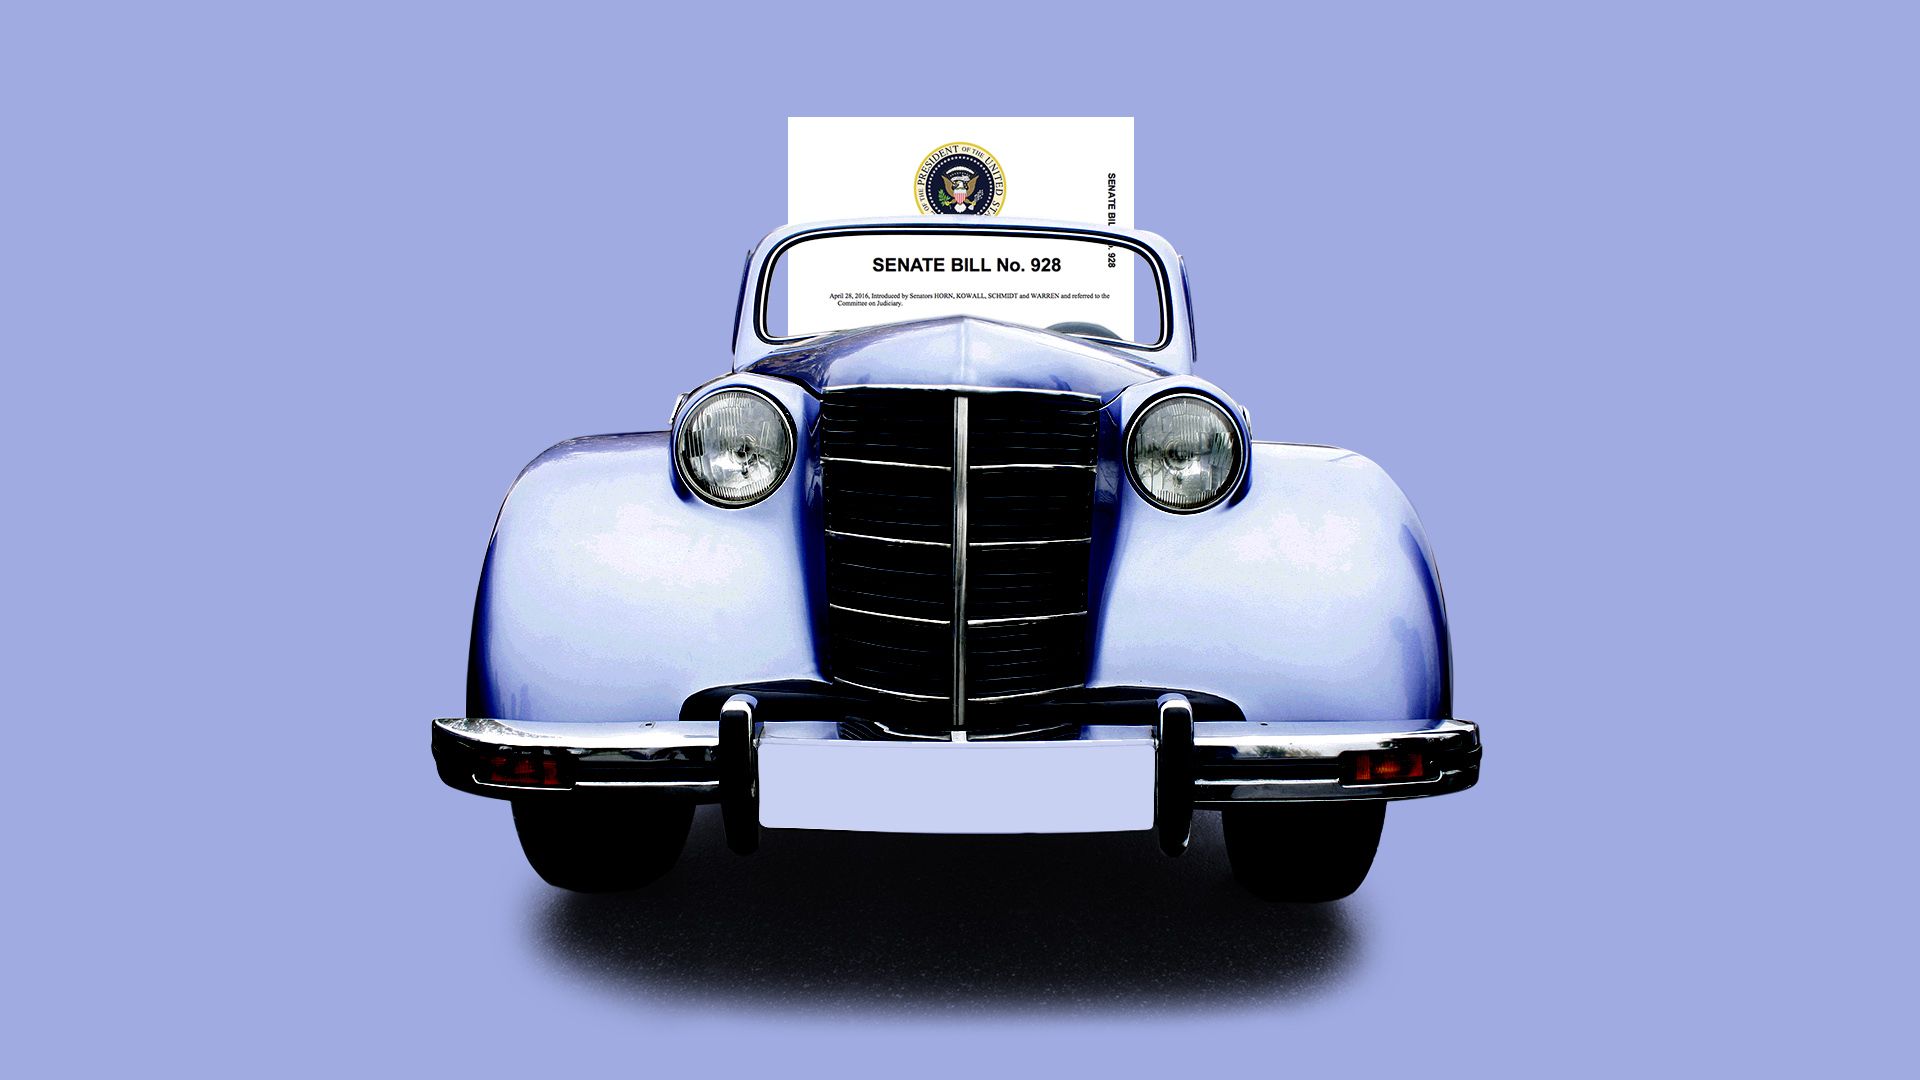 An illustration of the front of a vehicle with a bill sitting in the front seat.